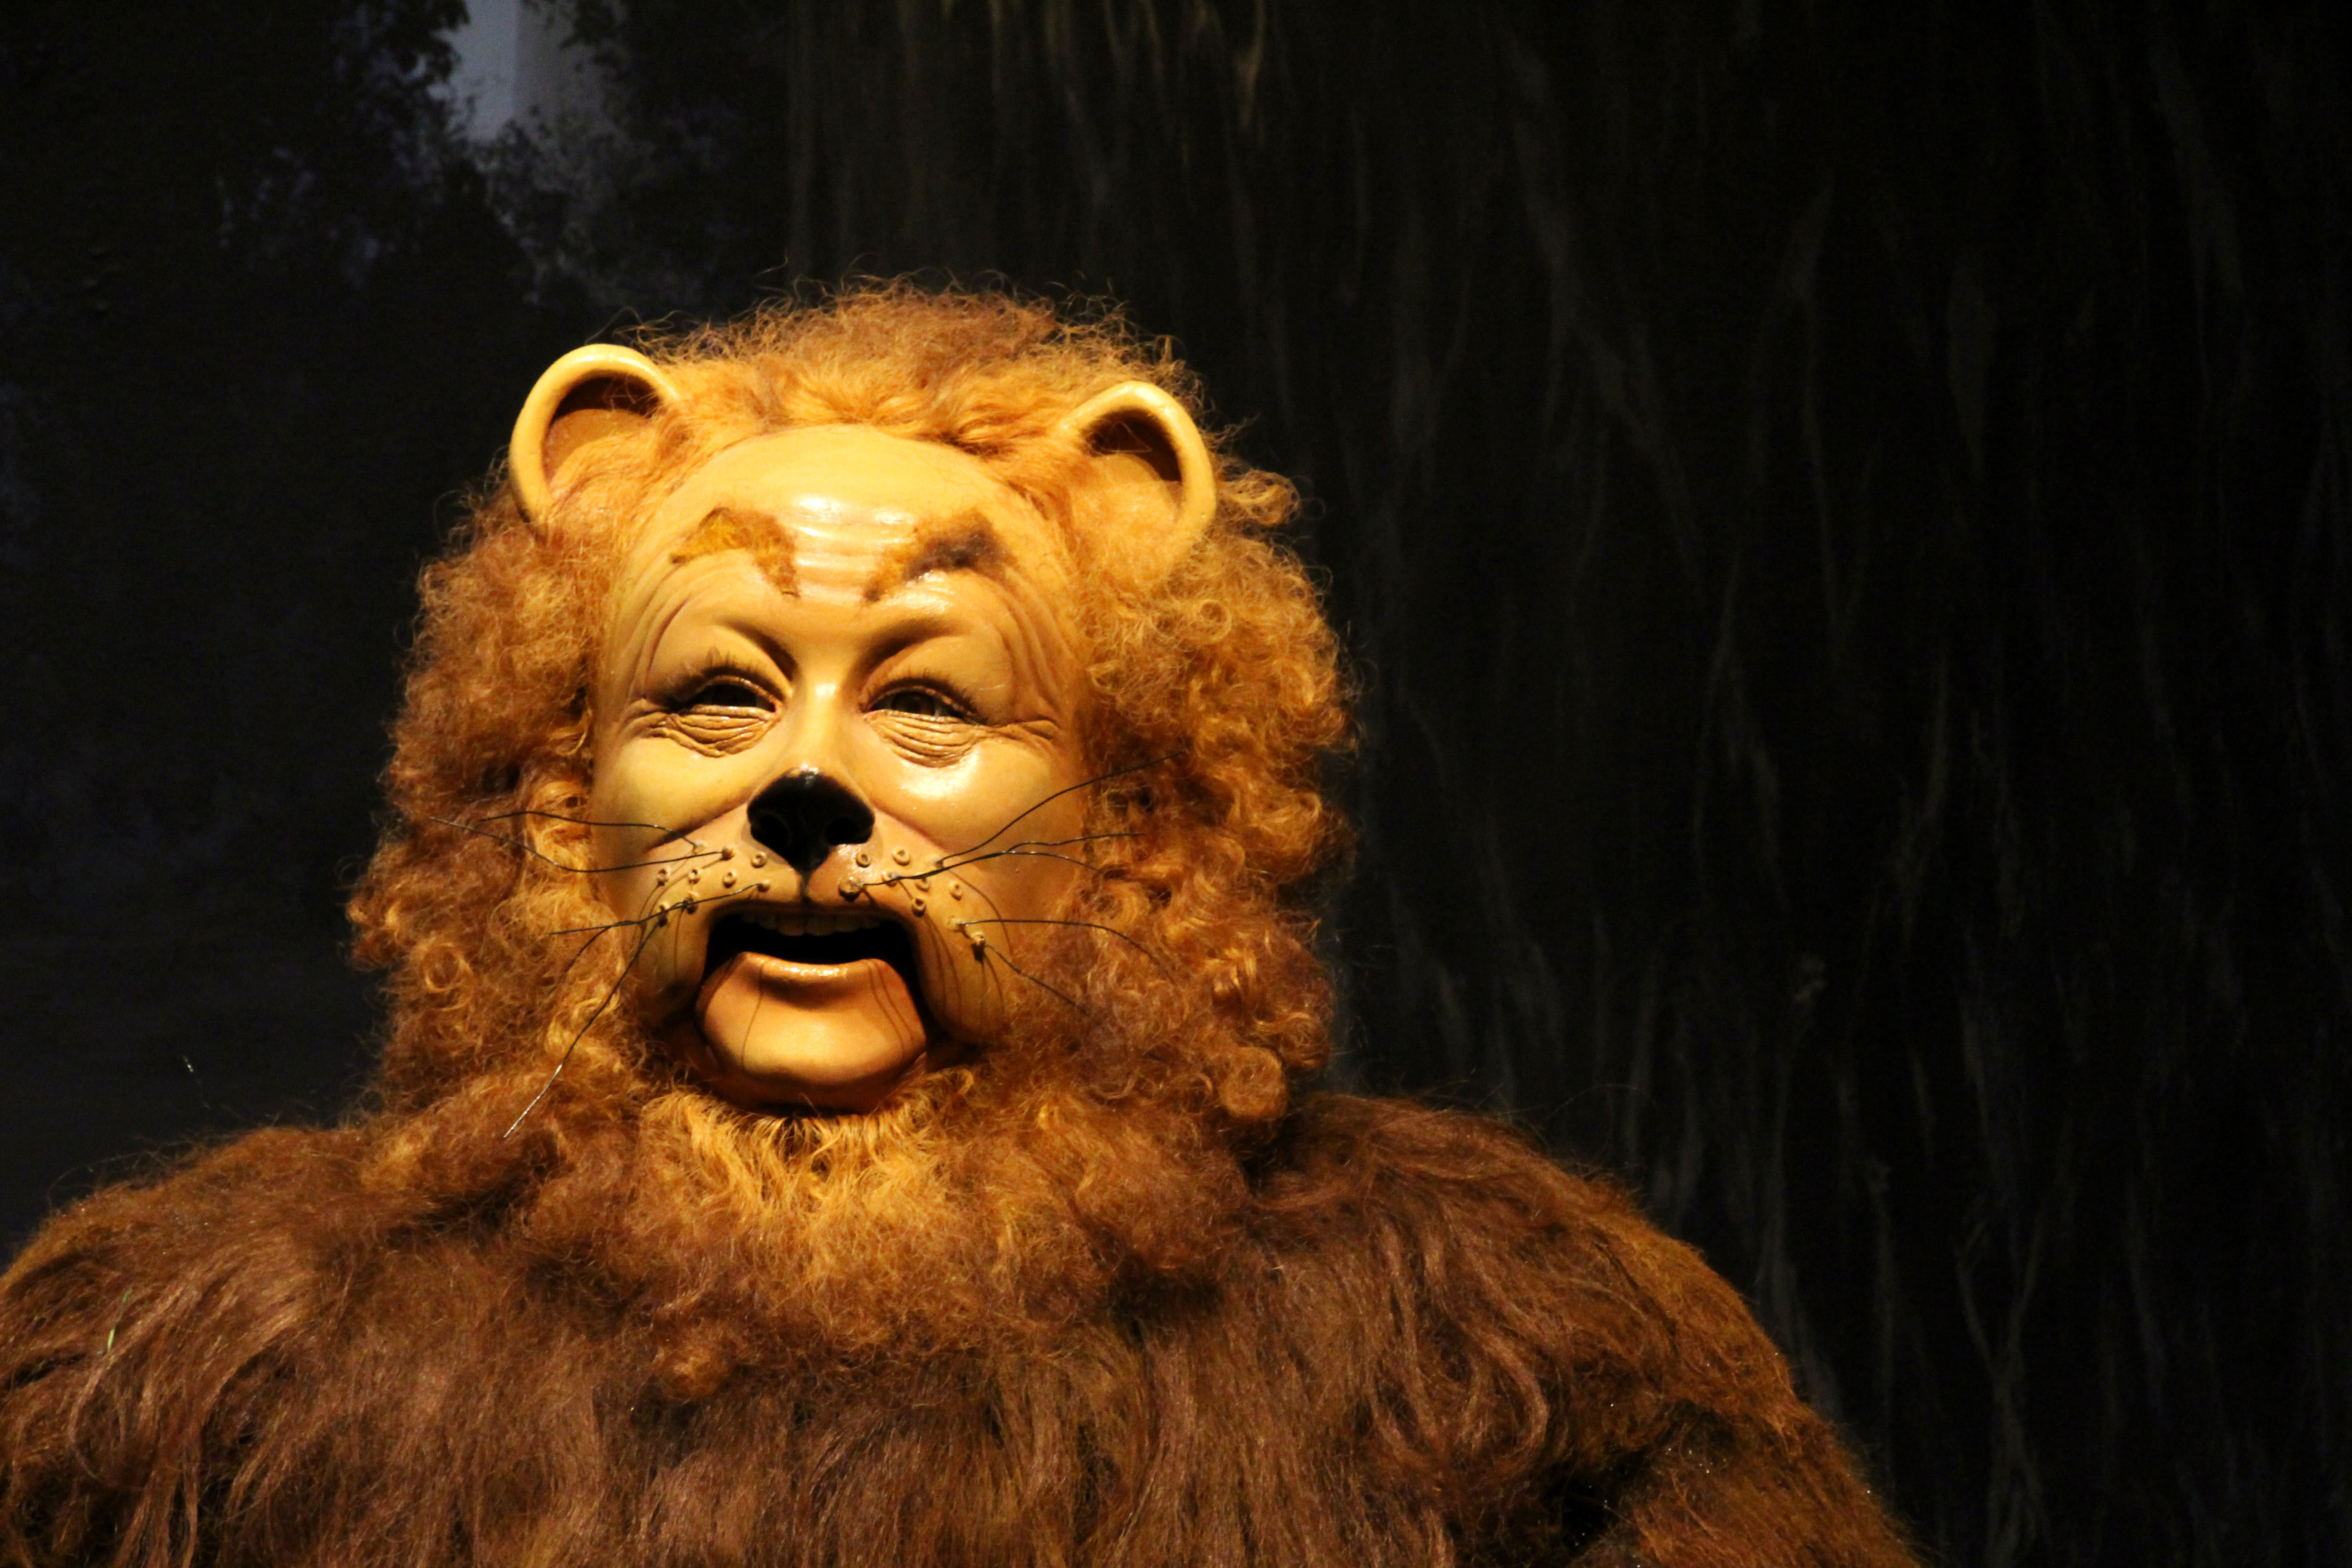 The Cowardly Lion at the Oz Museum. Image by Lauren Wellicome / Lonely Planet